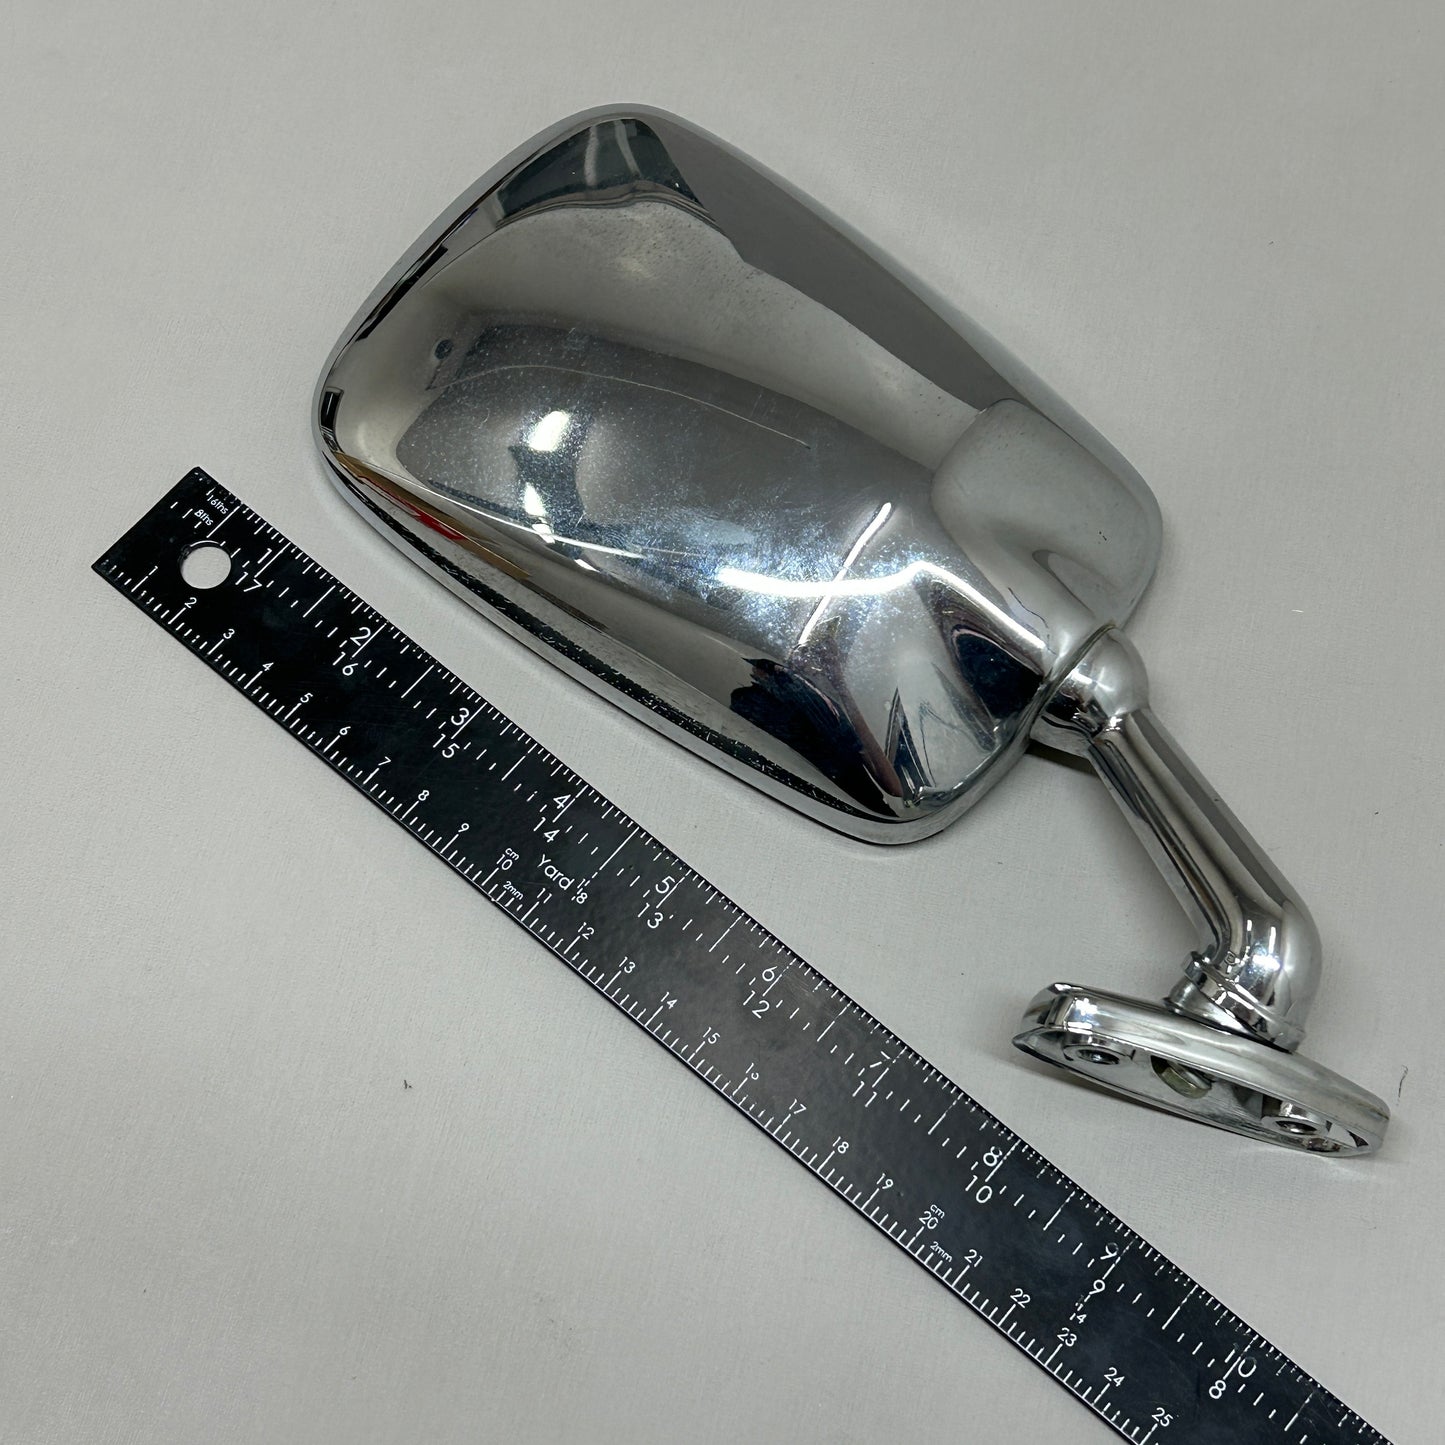 HONDA Genuine Parts Left Side Rear View Side Mirrors Silver 88130-MB9-771 (New Other)